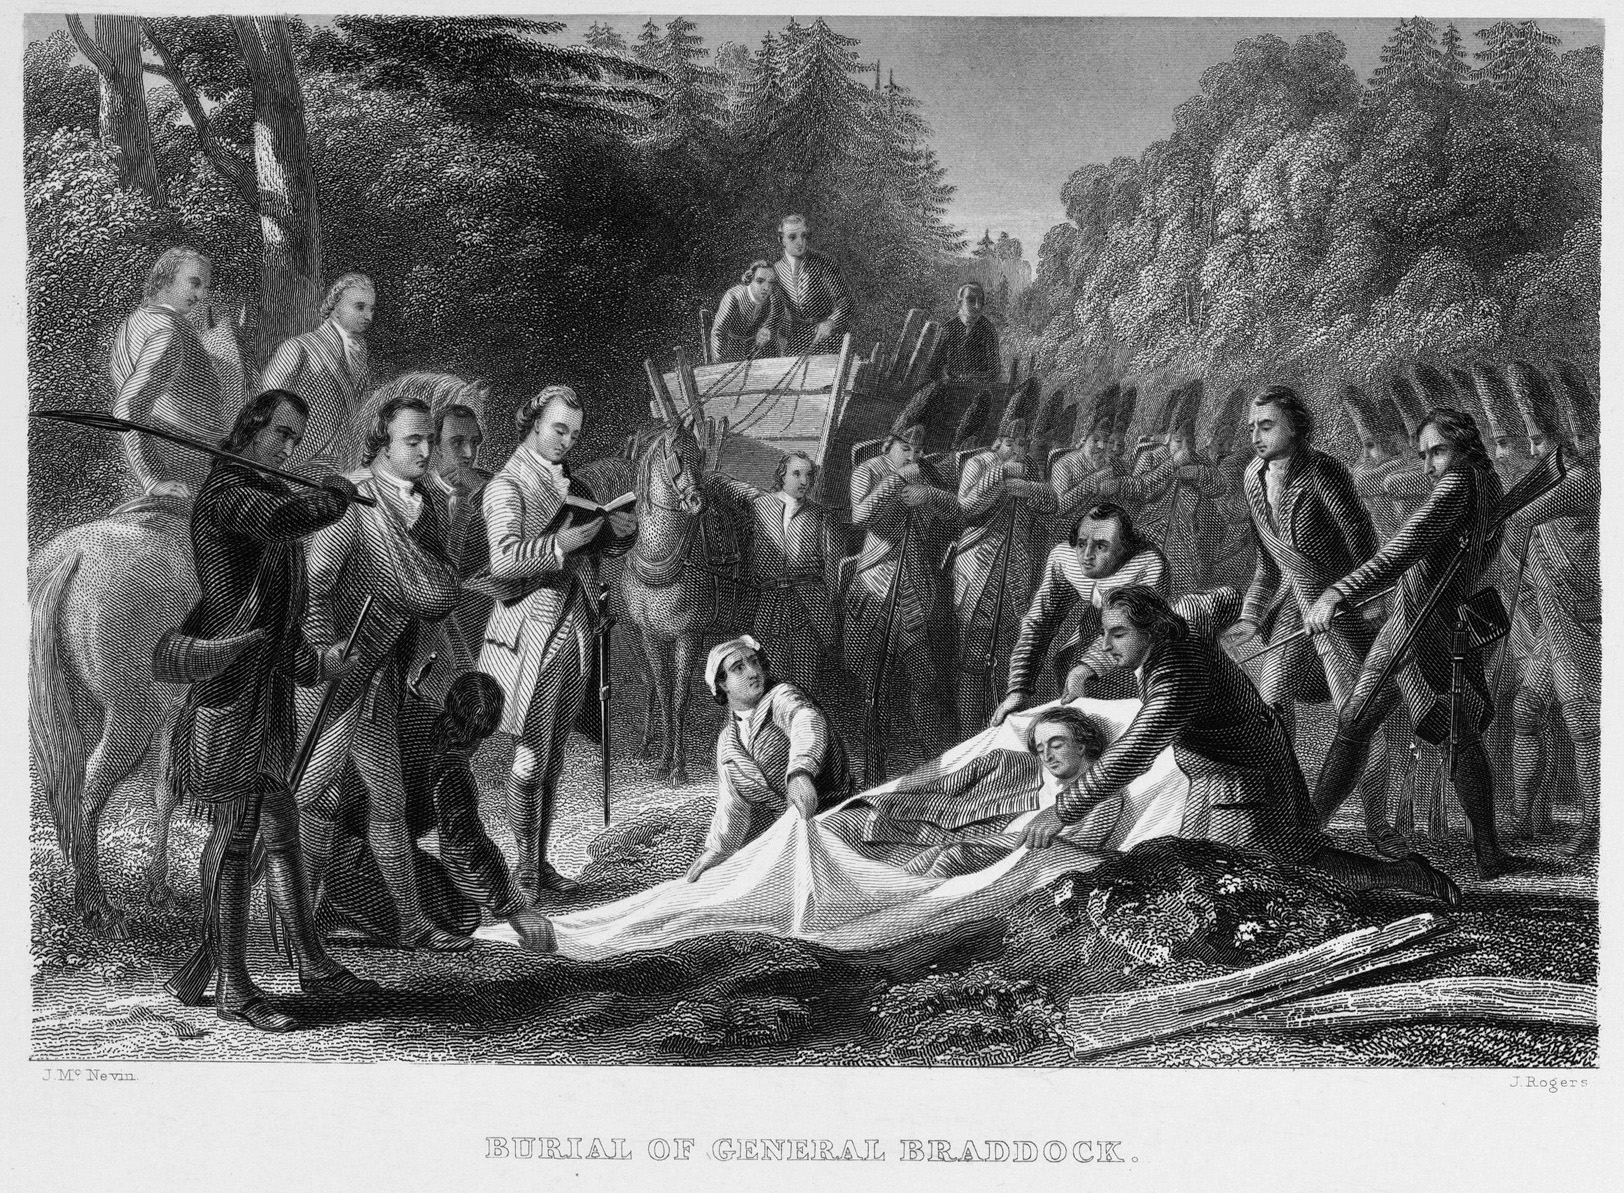 Braddock died five days after the battle and was buried in an unmarked grave in the road his troops had cut through the wilderness. The survivors of the expedition marched over the gravesite, leaving no trace of its location.